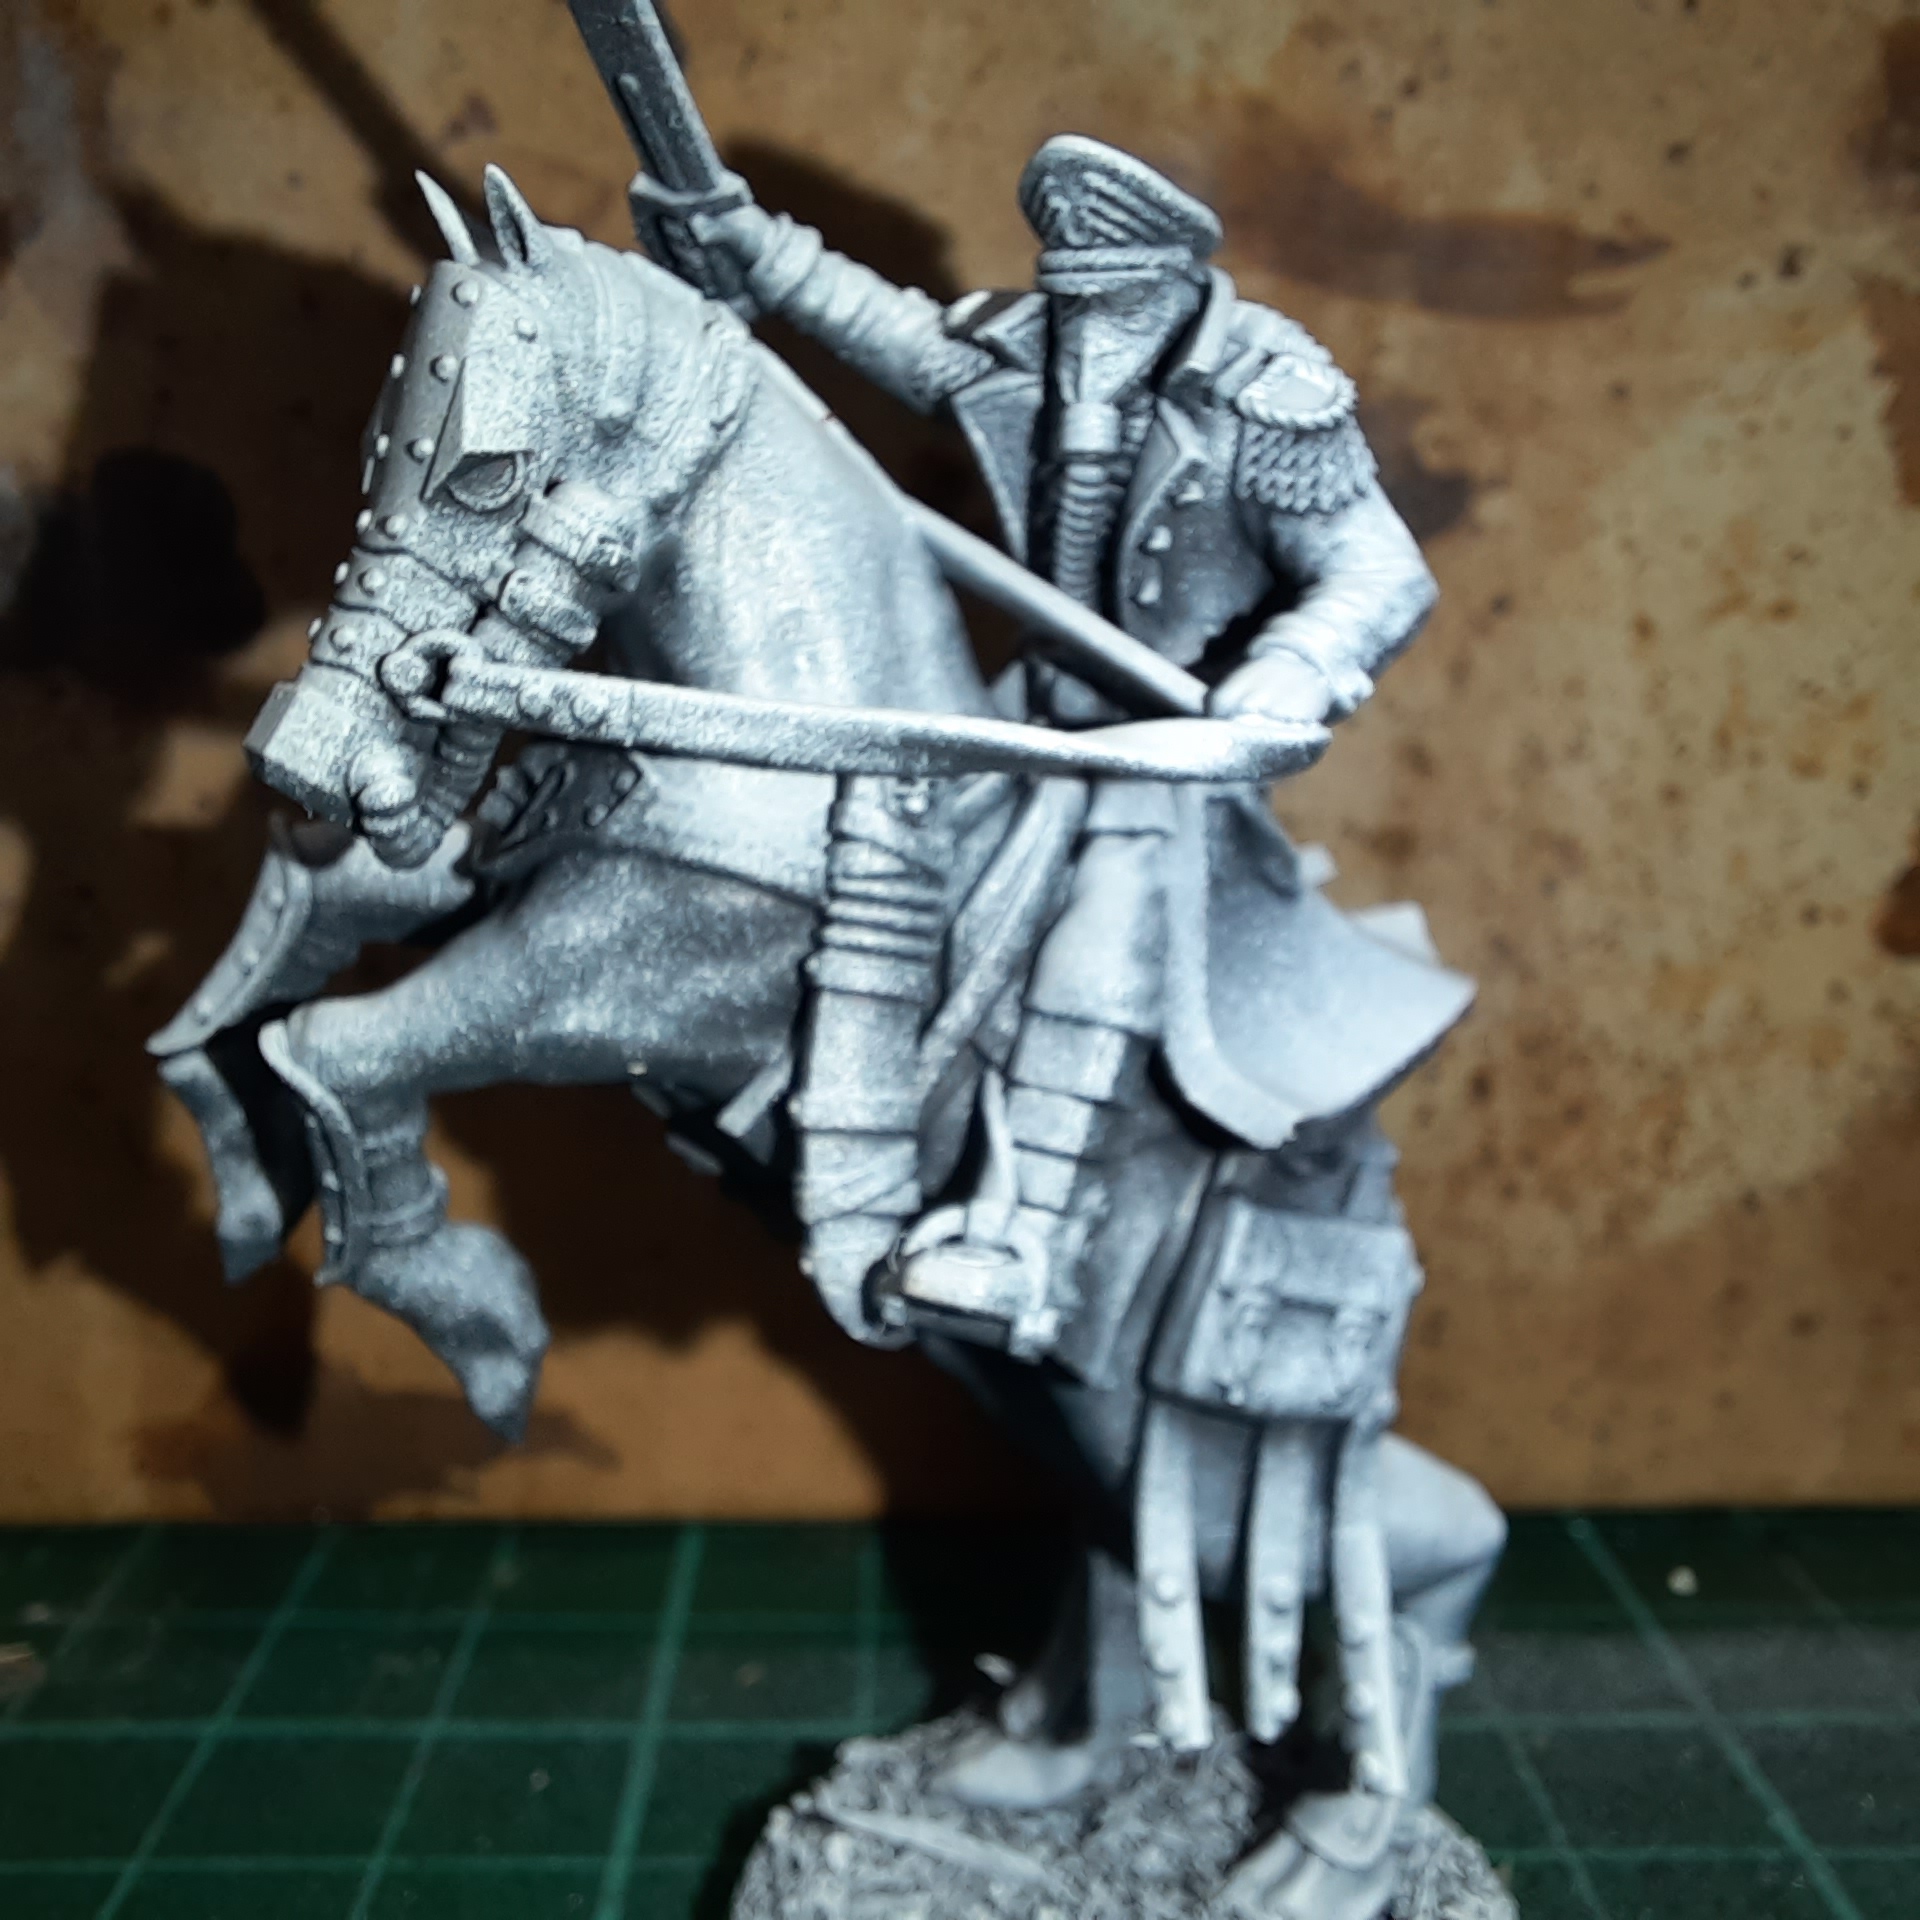 3D Printed Guardsman #1 by wrusher